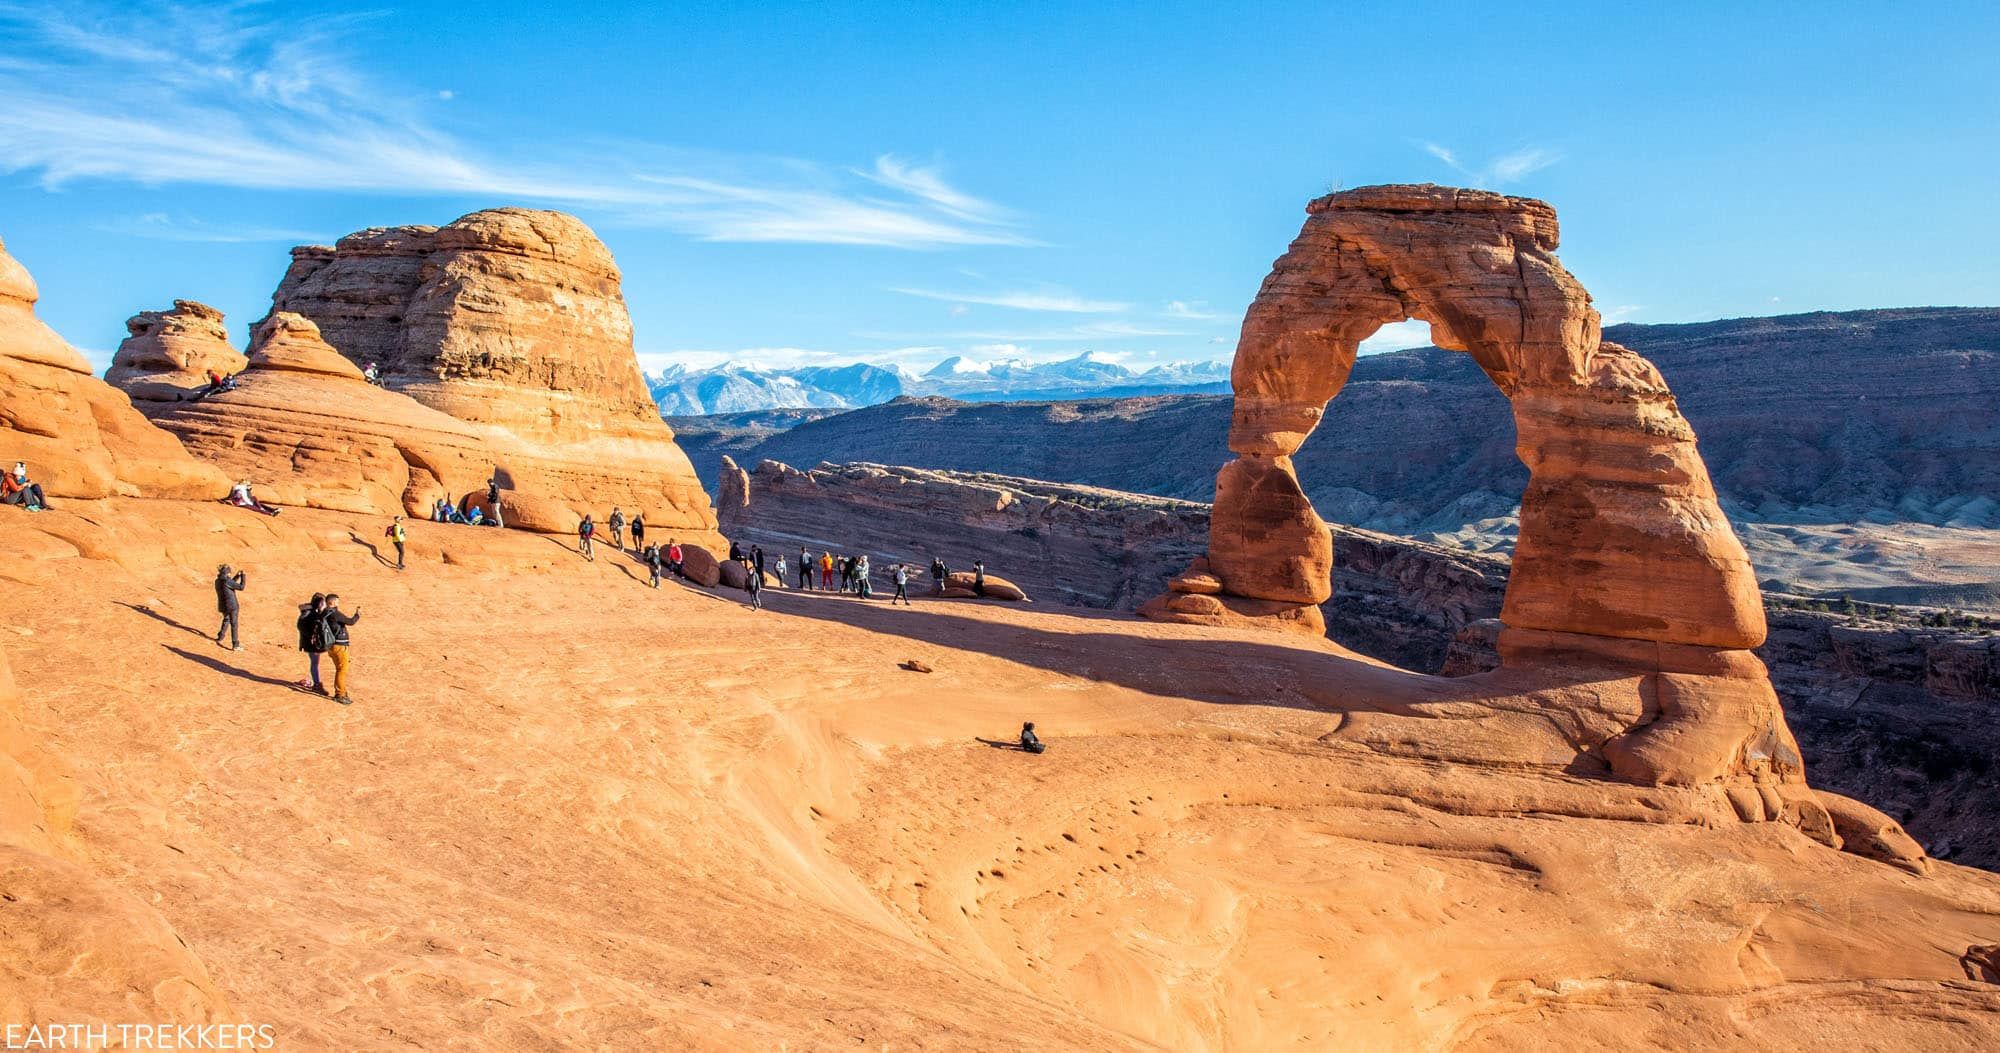 Featured image for “Delicate Arch: Best Photo Spots, Hiking Tips, & Interesting Facts”